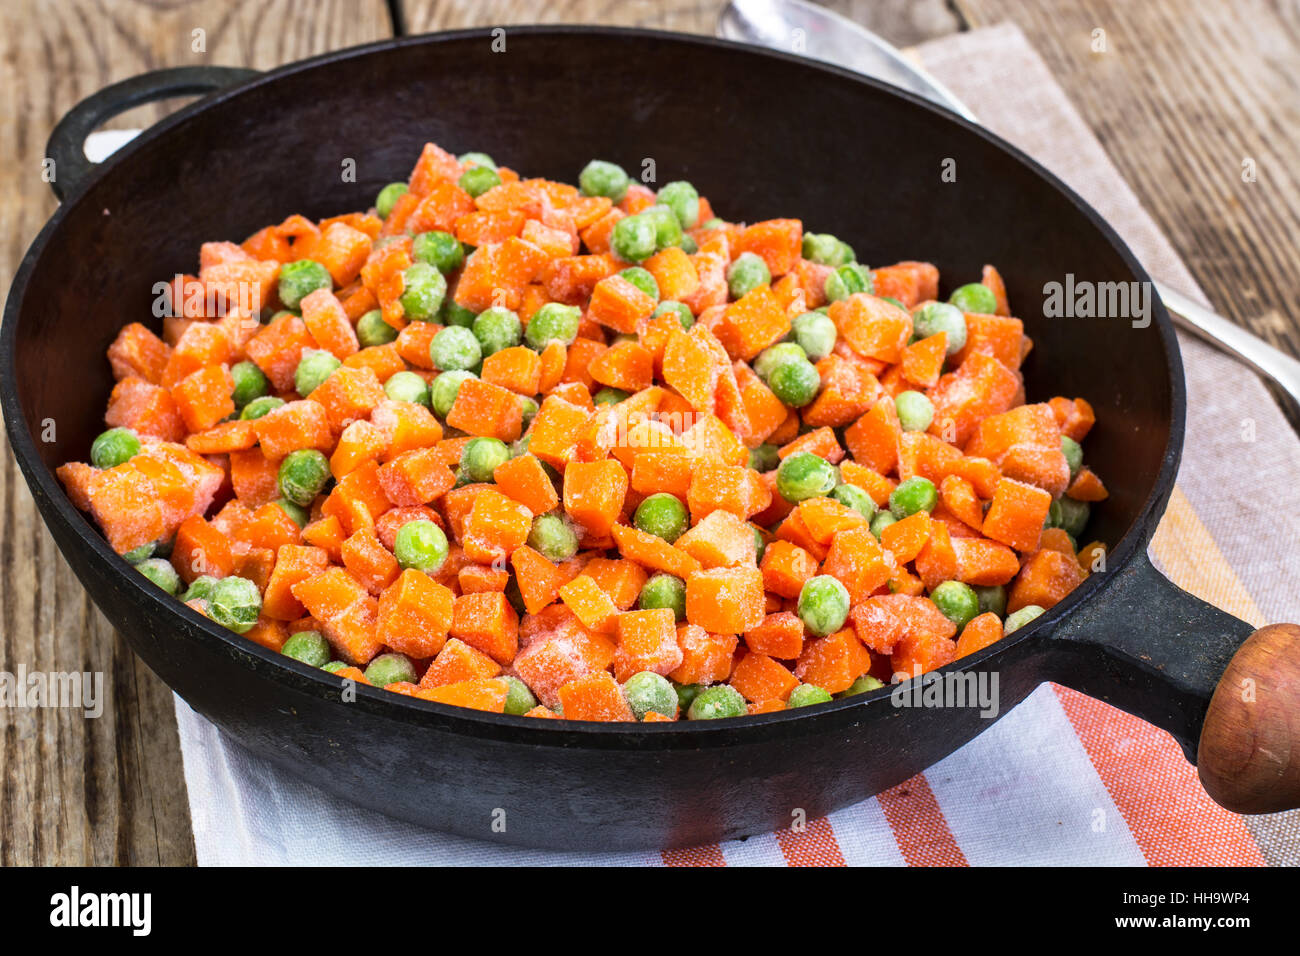 Frozen Peas And Carrots For Cooking On A Pan Stock Photo Alamy,Weber Spirit E 310 Dimensions